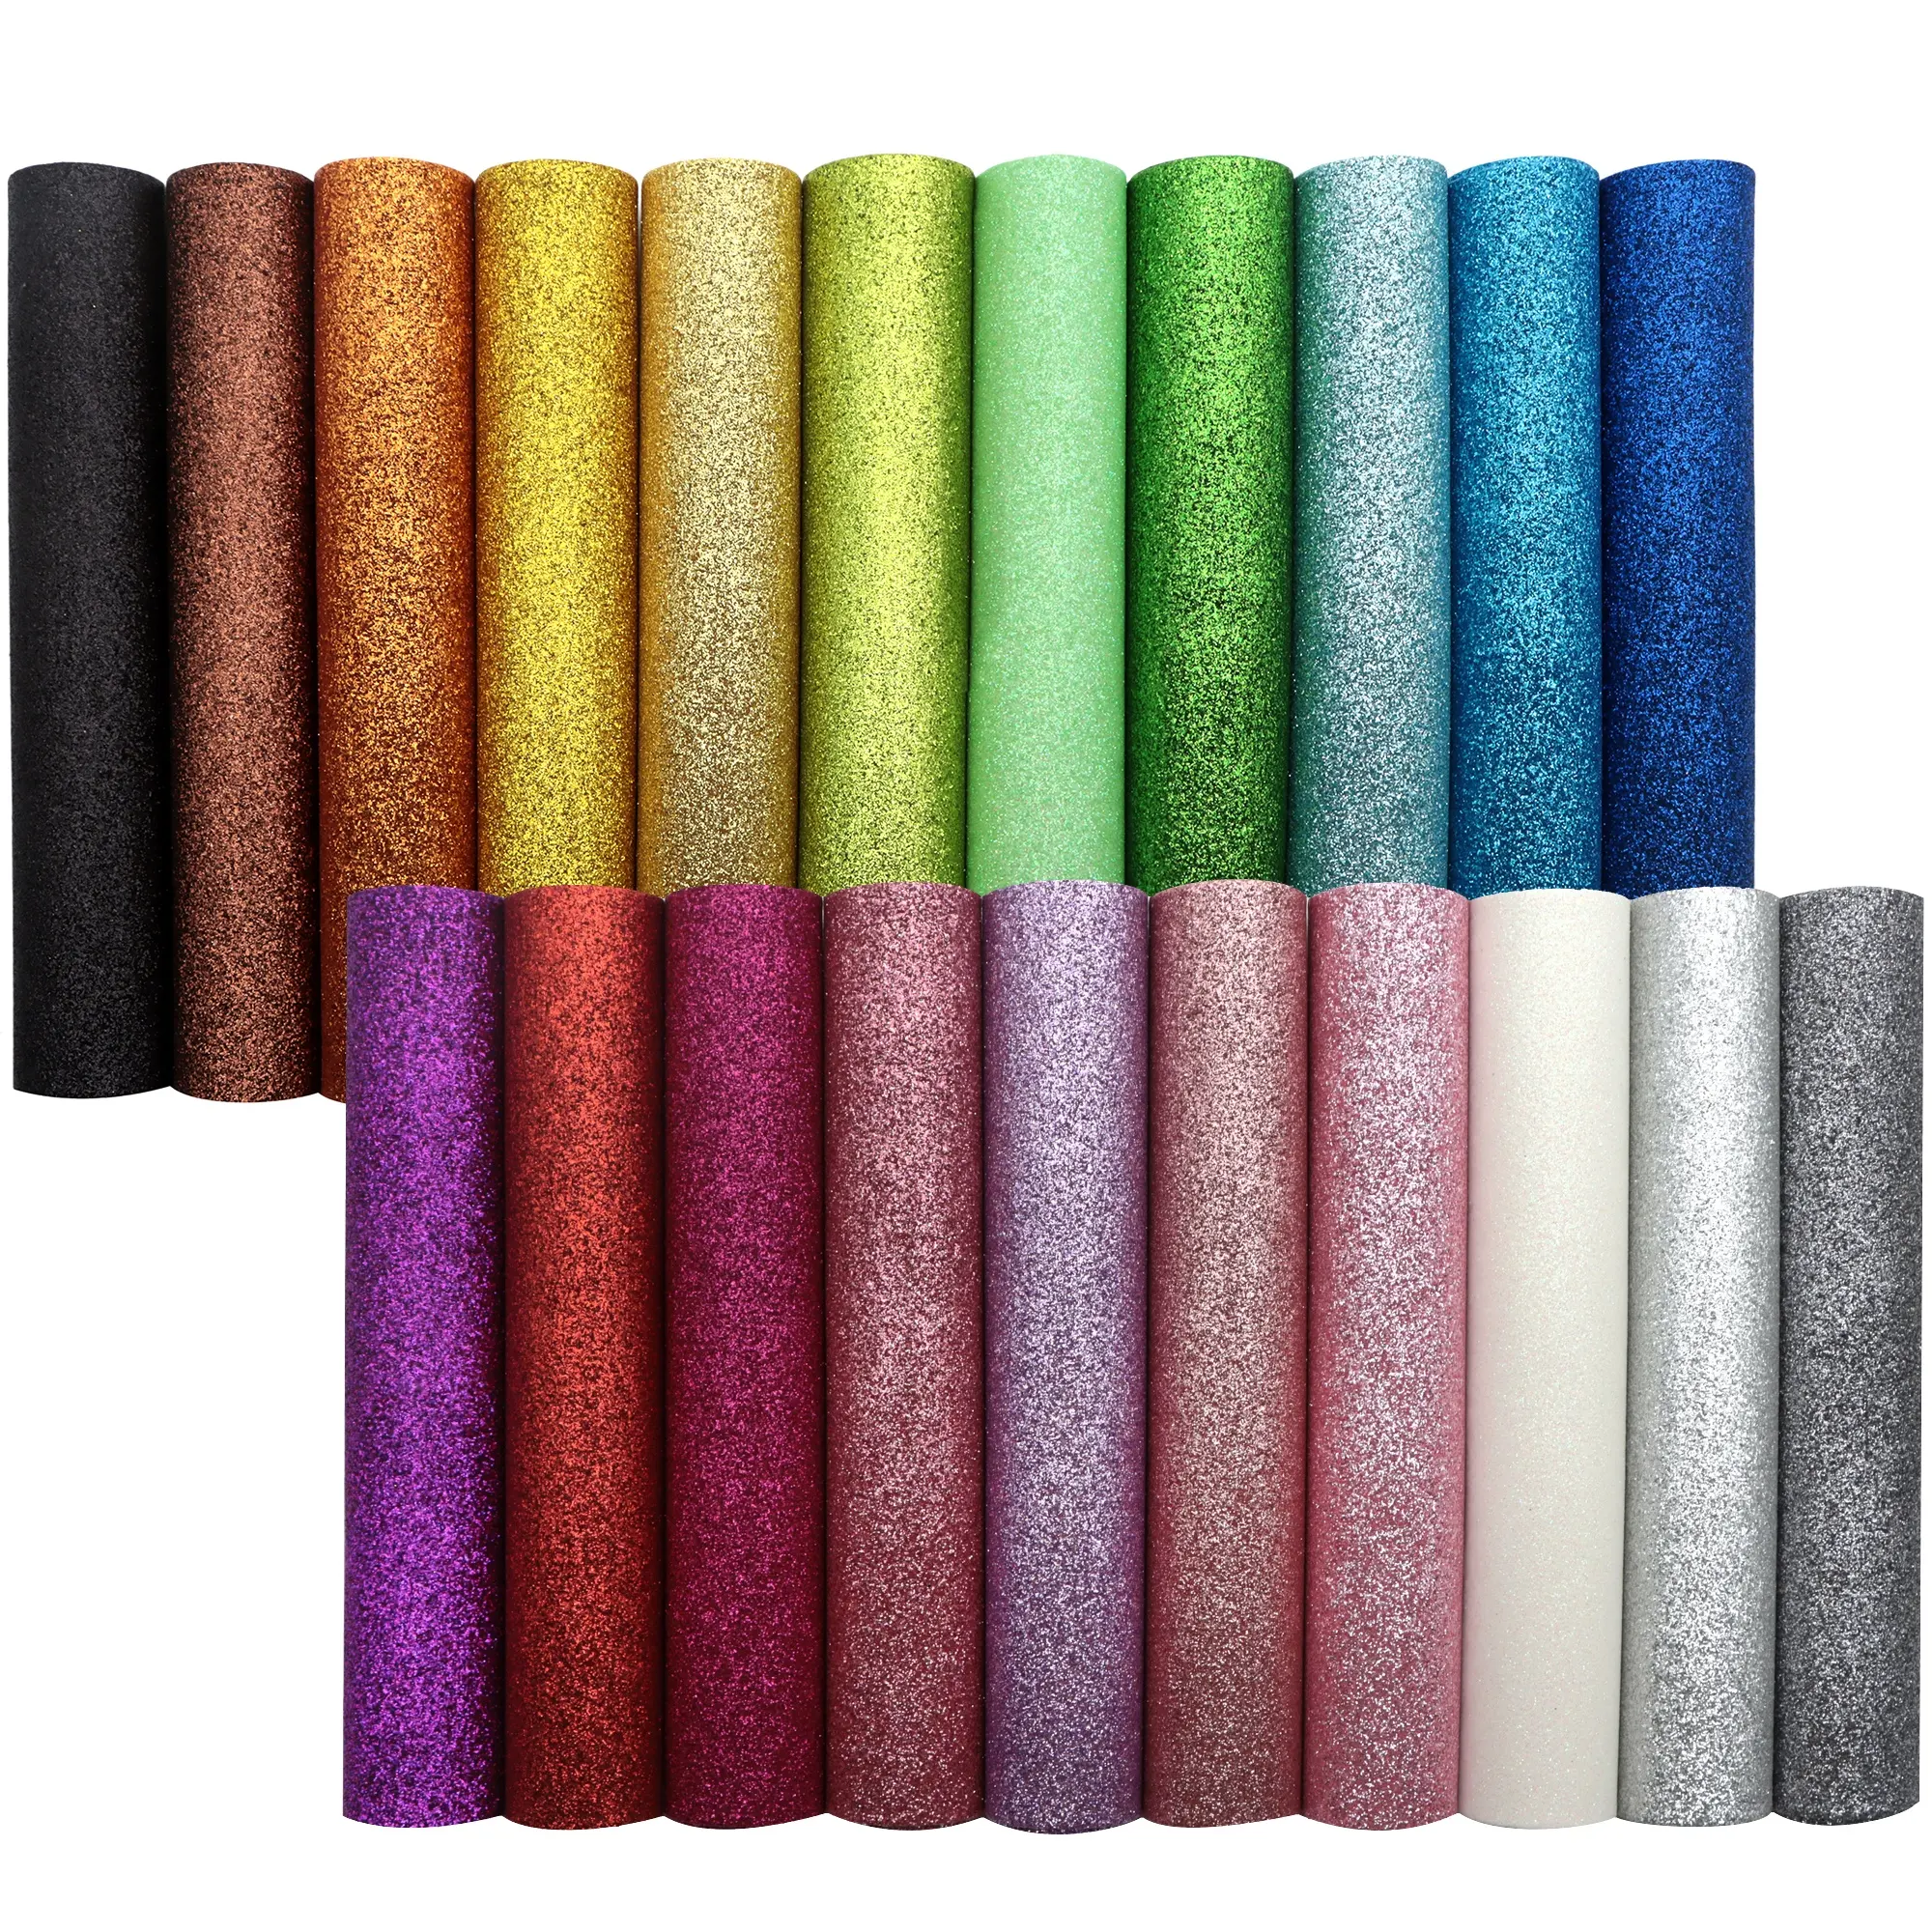 20x33cm Bulk Plain Color Superfine Glitter pvc Faux Synthetic Leather Fabric Sheet For Hair Bows Making 54204